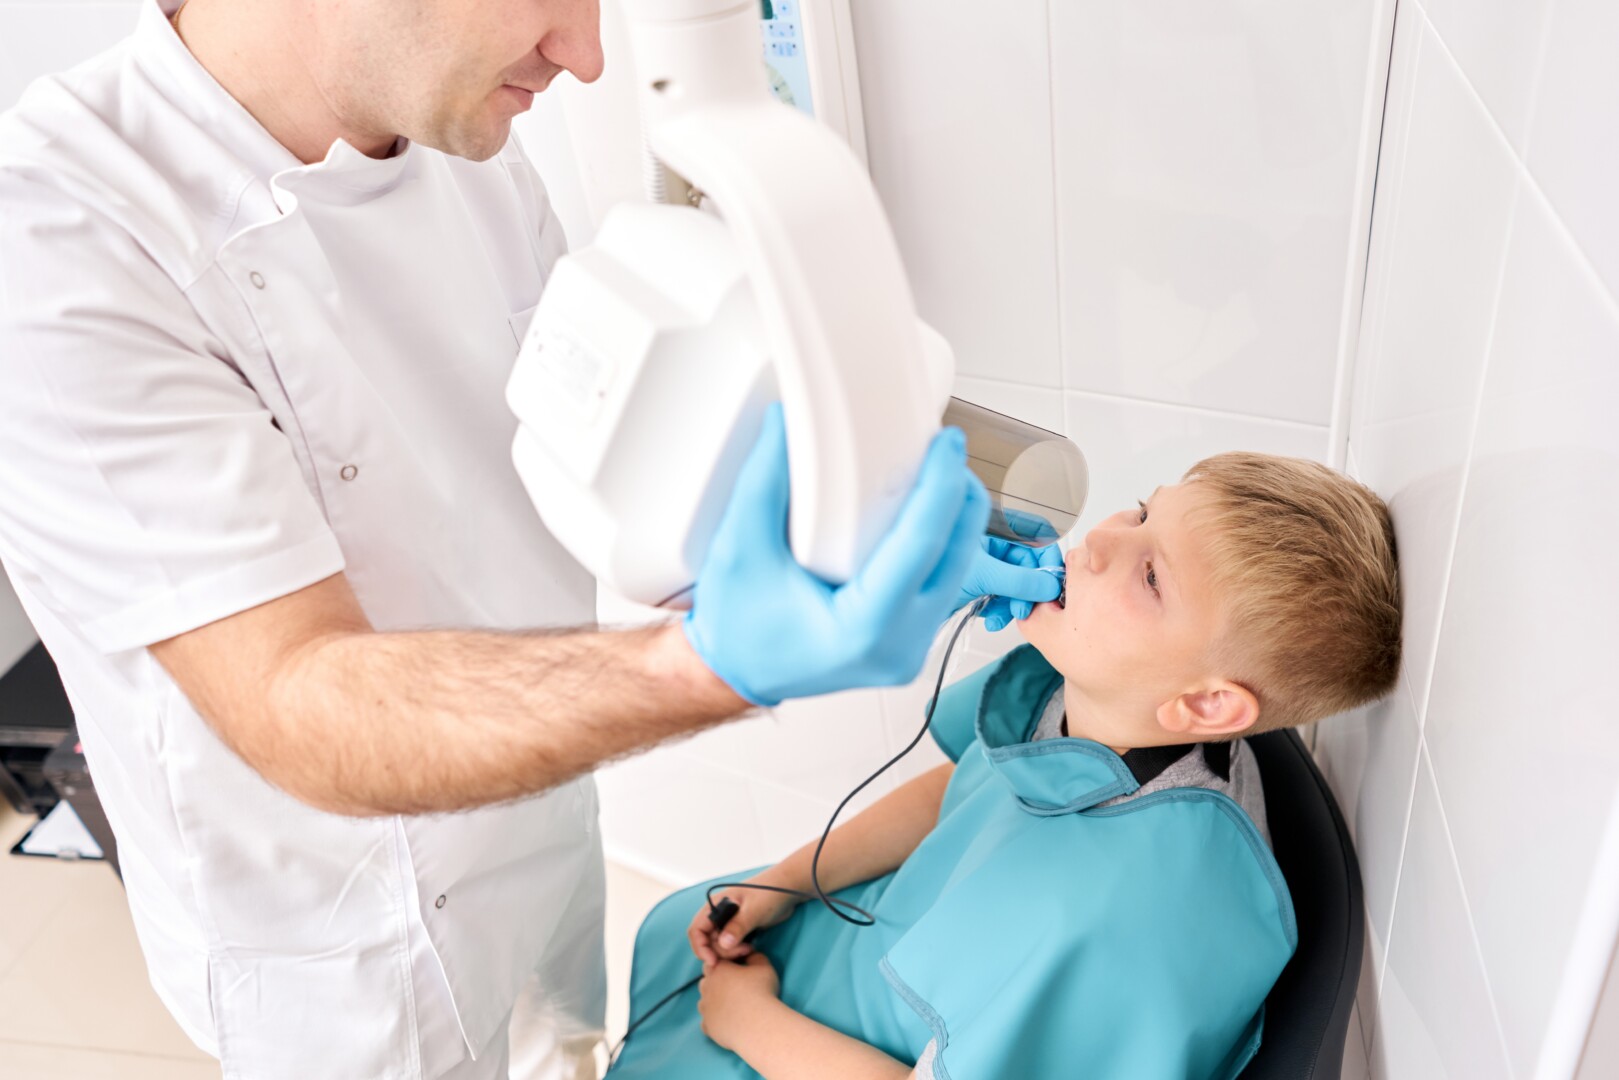 A dentist places an x-ray camera in a child's mouth to take images of the child's teeth. The child wears a light blue lead apron for protection.